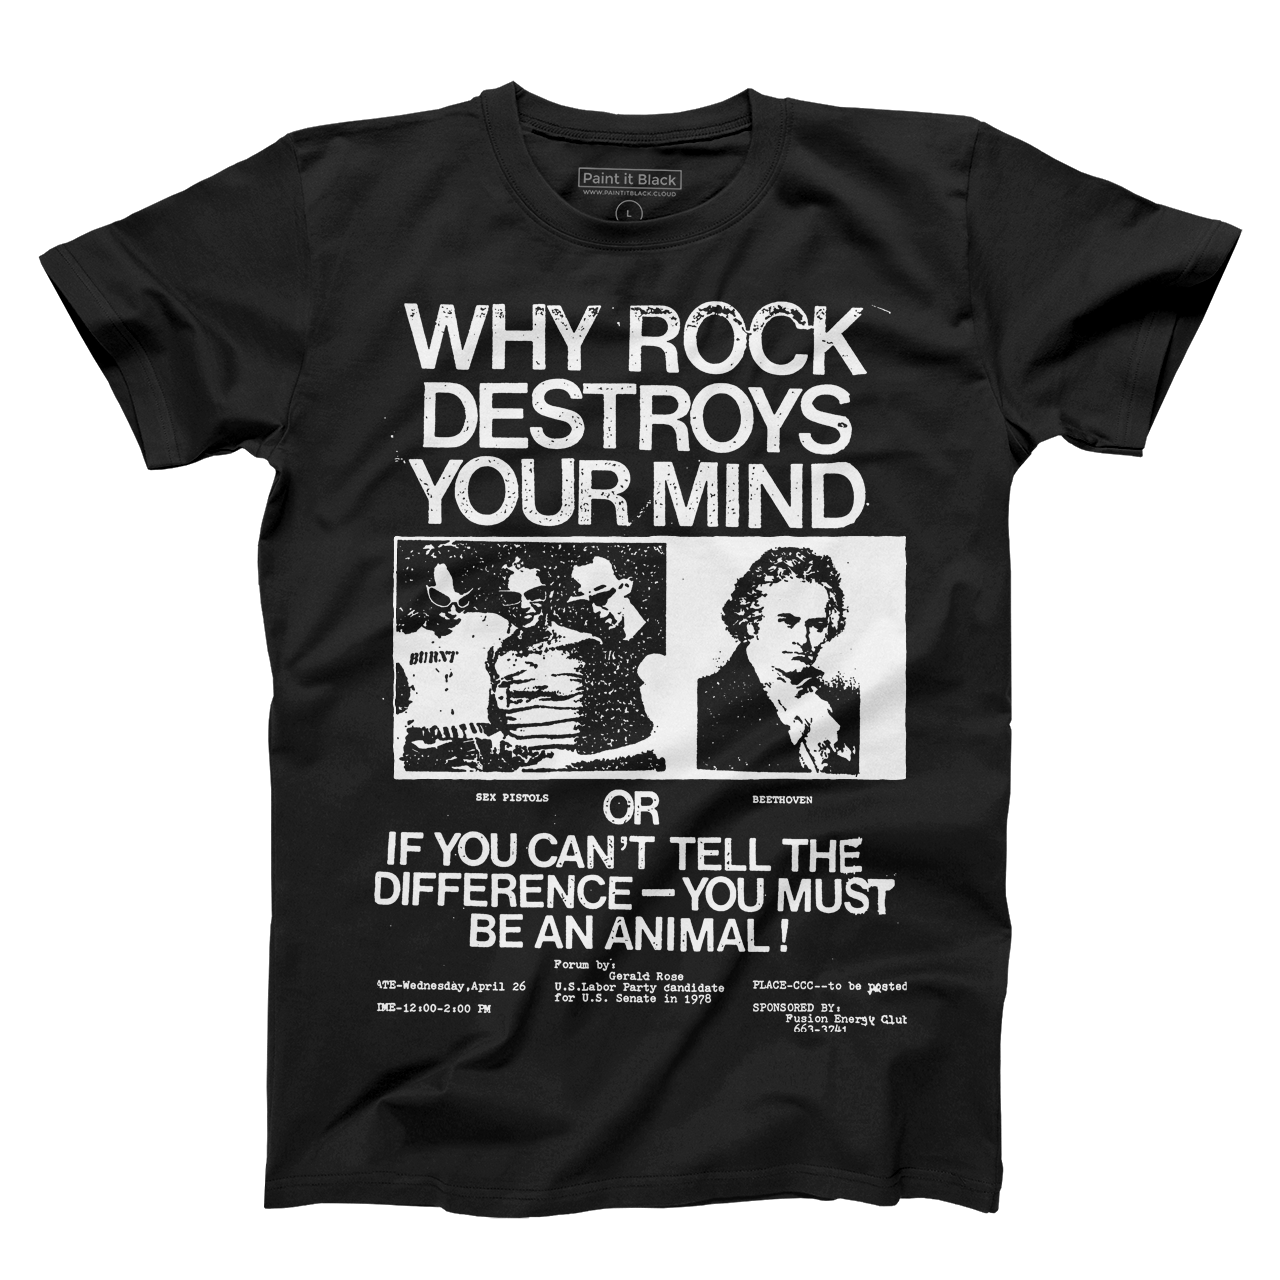 Why rock destroys your mind Mens T-Shirt pic image